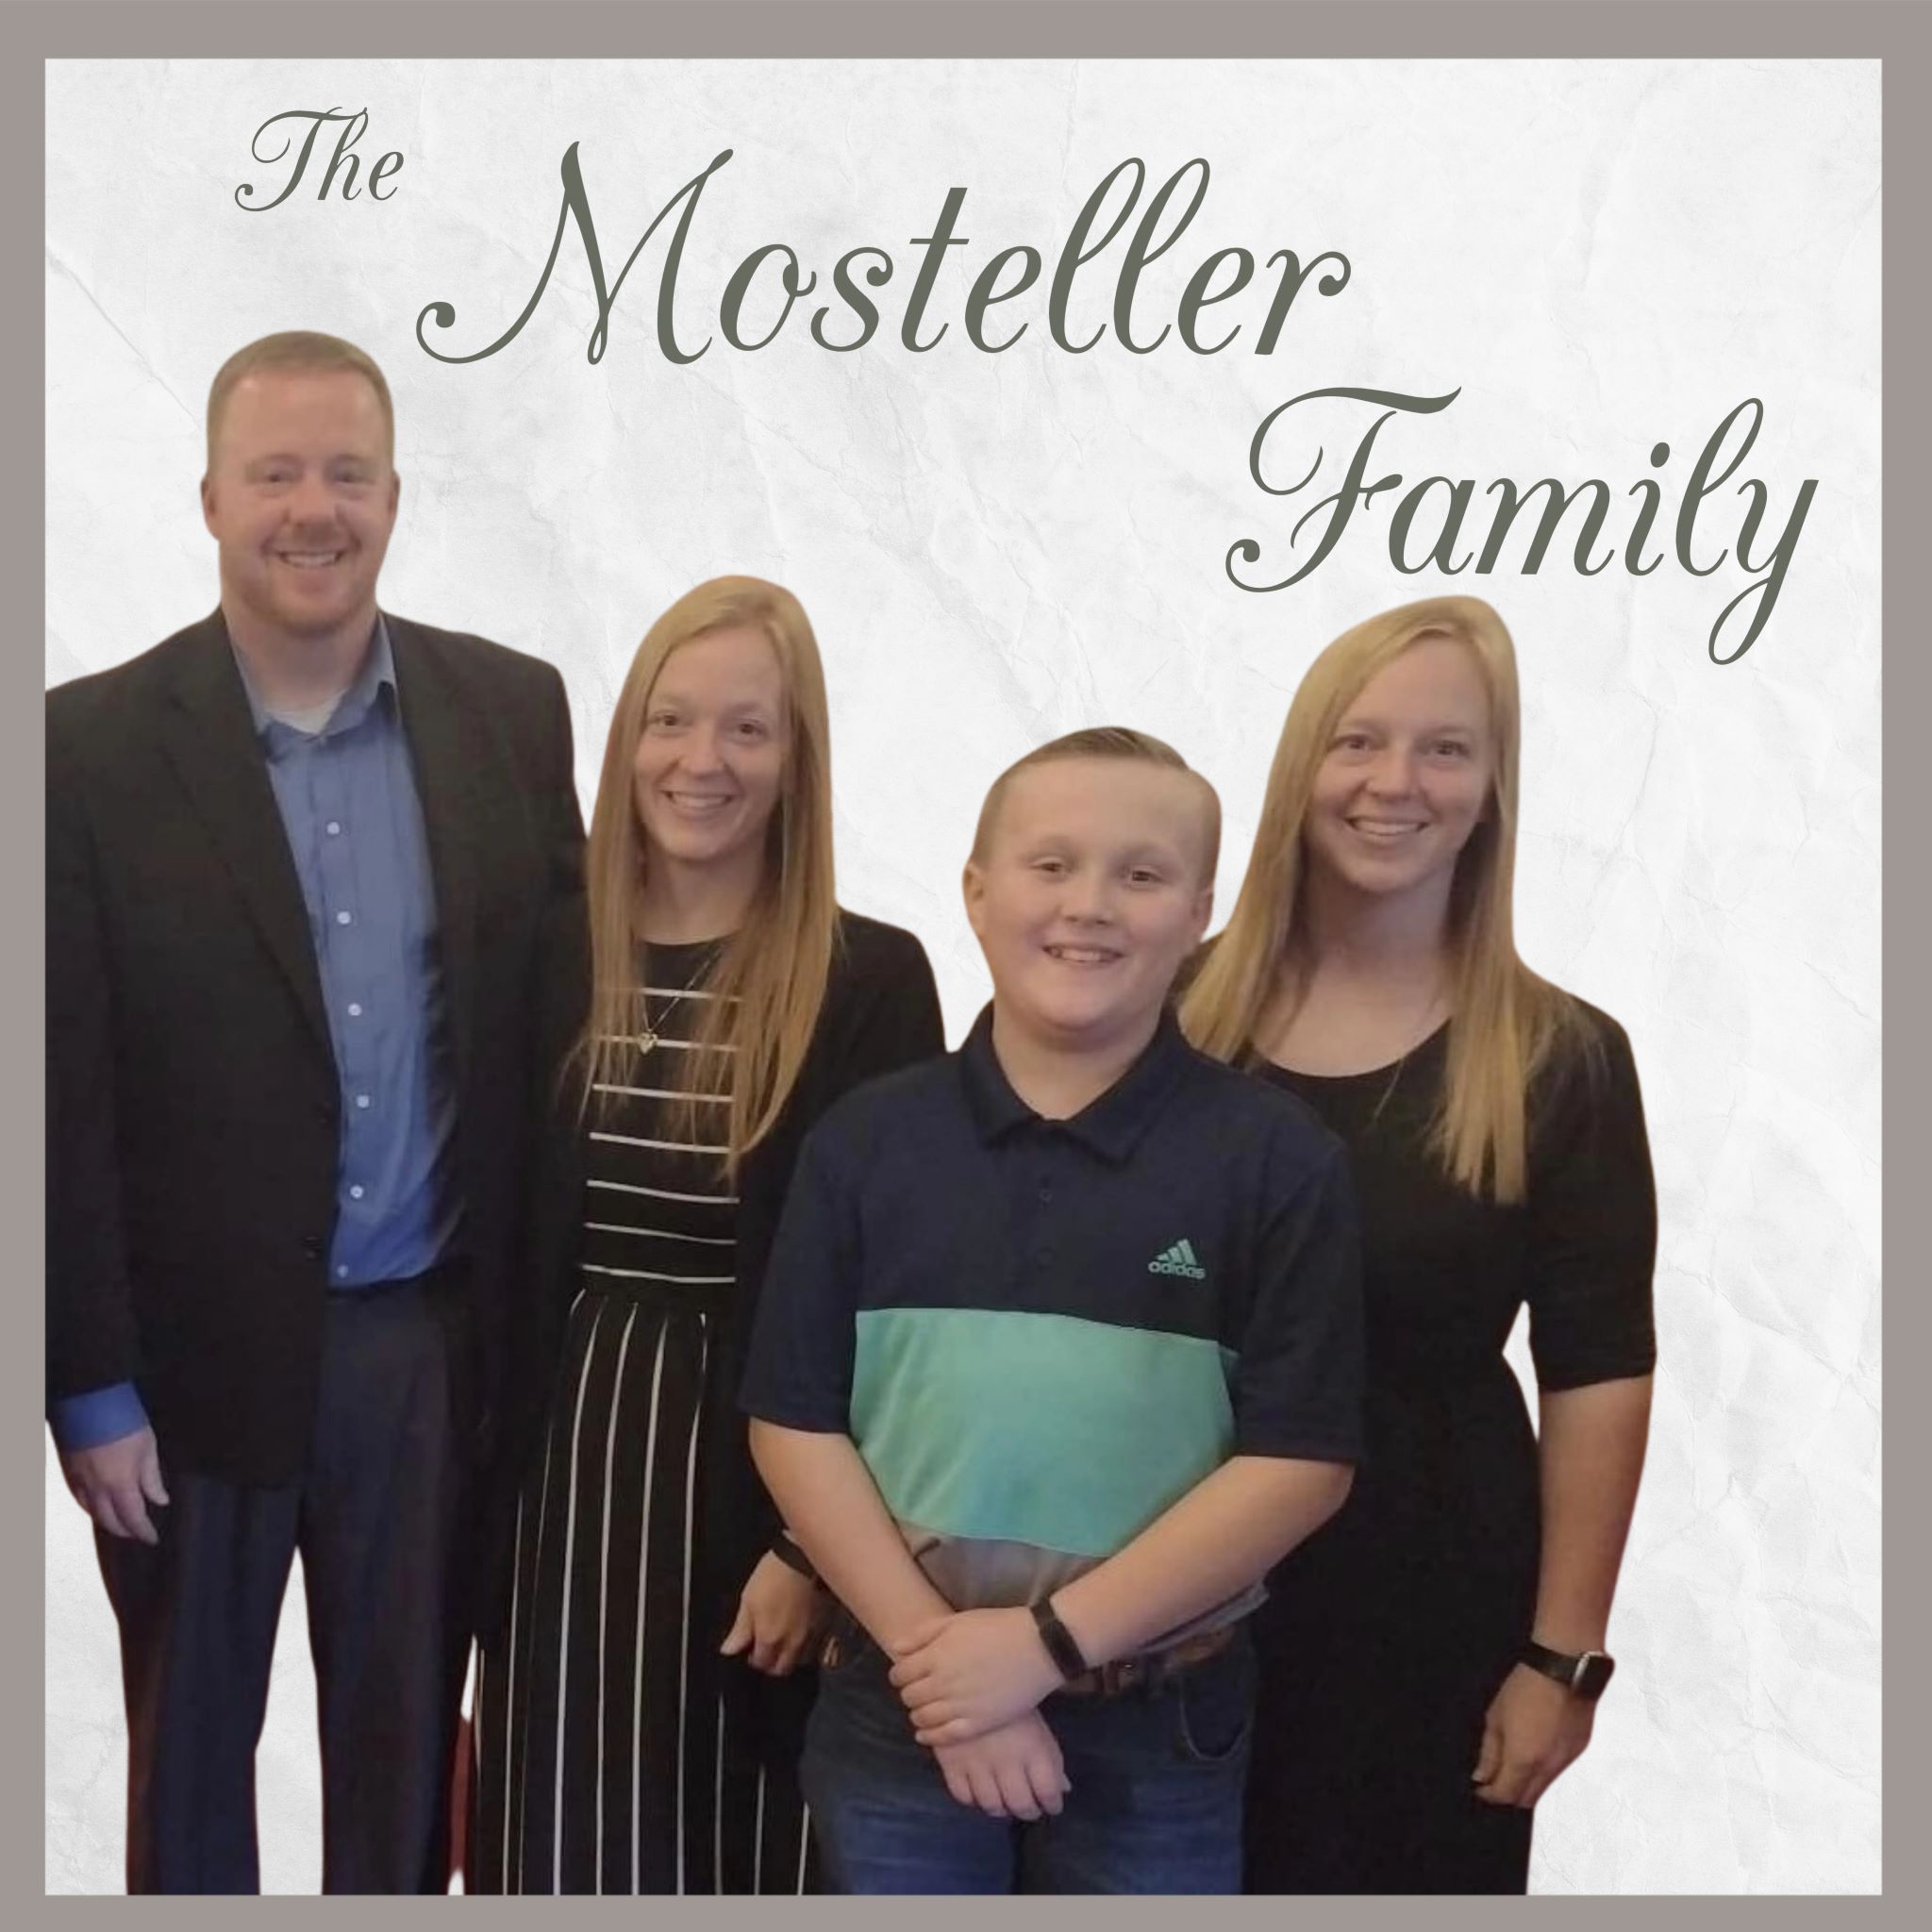 Family Harmony and Celebration with Mosteller Family Ministries